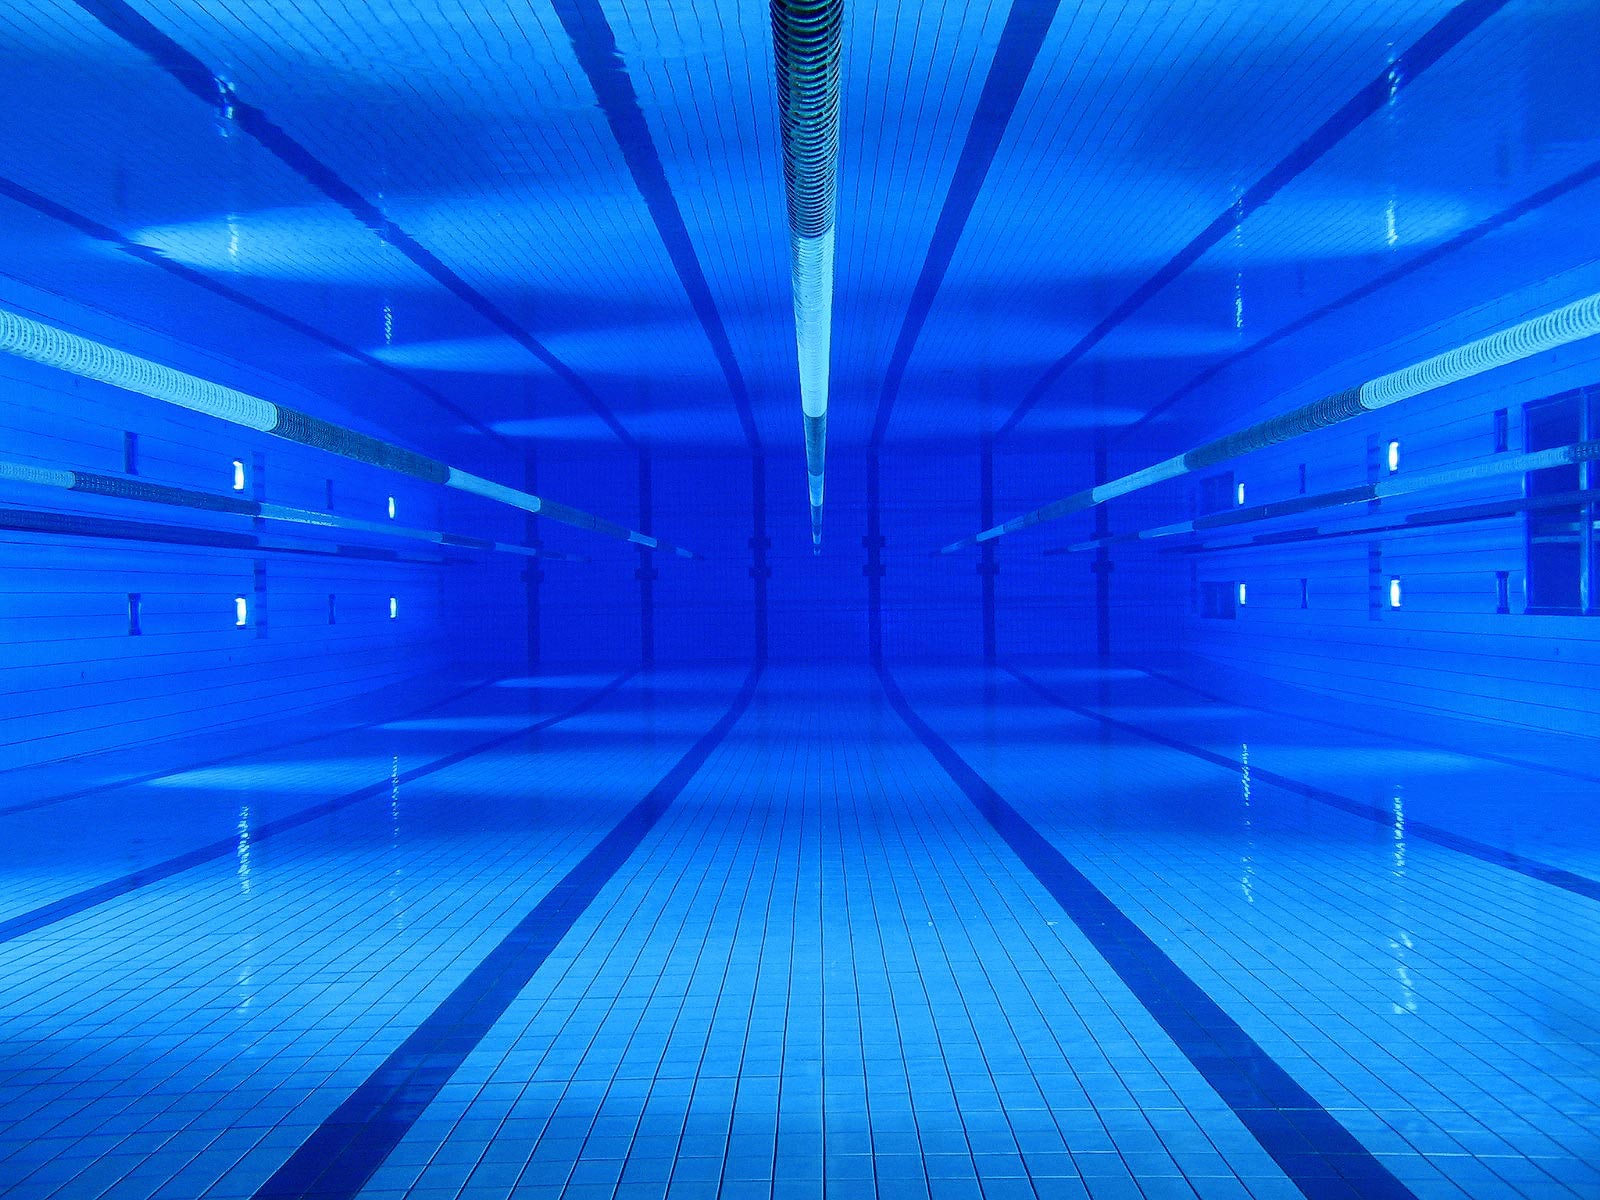 Underwater In An Olympic Sized Swimming Pool